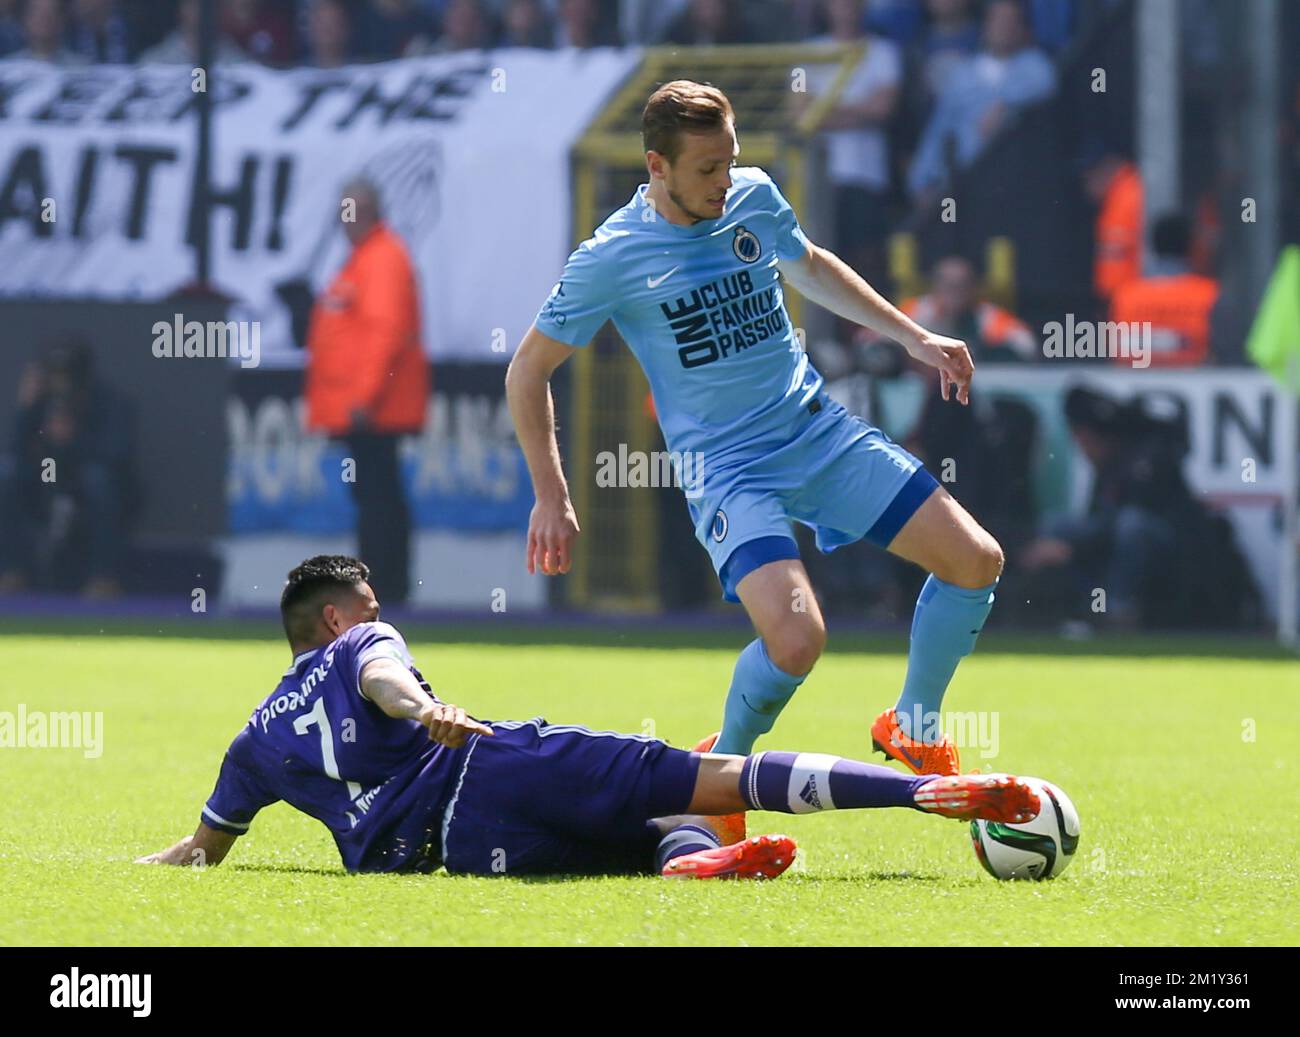 20150510 - BRUSSELS, BELGIUM: Anderlecht's Andy Najar and Club's Laurens De Bock fight for the ball during the Jupiler Pro League match between RSC Anderlecht and Club Brugge, Sunday 10 May 2015 in Brussels, on the seventh day of the Play-off 1. BELGA PHOTO VIRGINIE LEFOUR Stock Photo